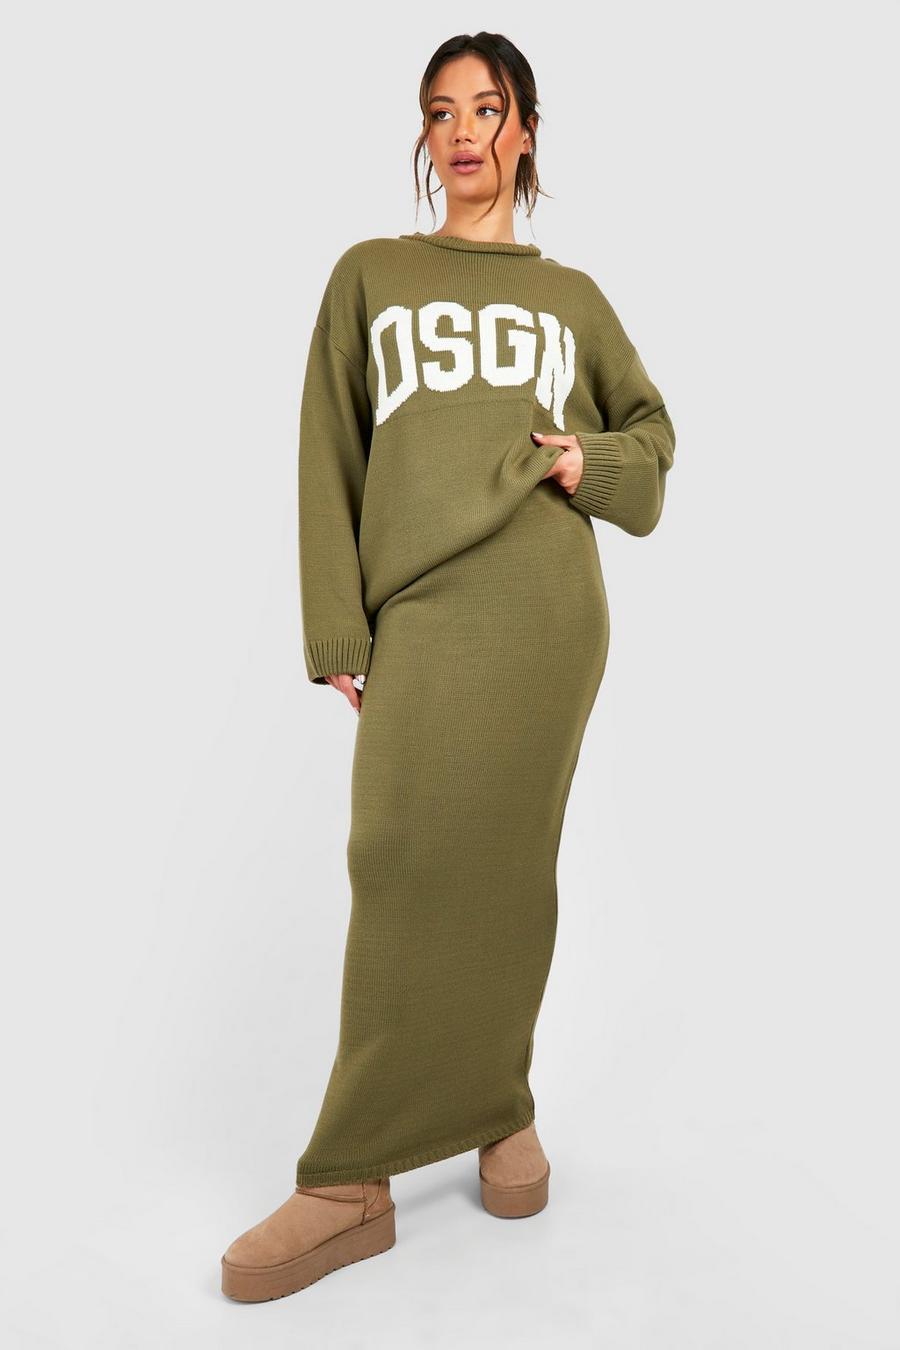 Khaki Dsgn Crew Neck Knitted Jumper And Maxi Skirt Set image number 1